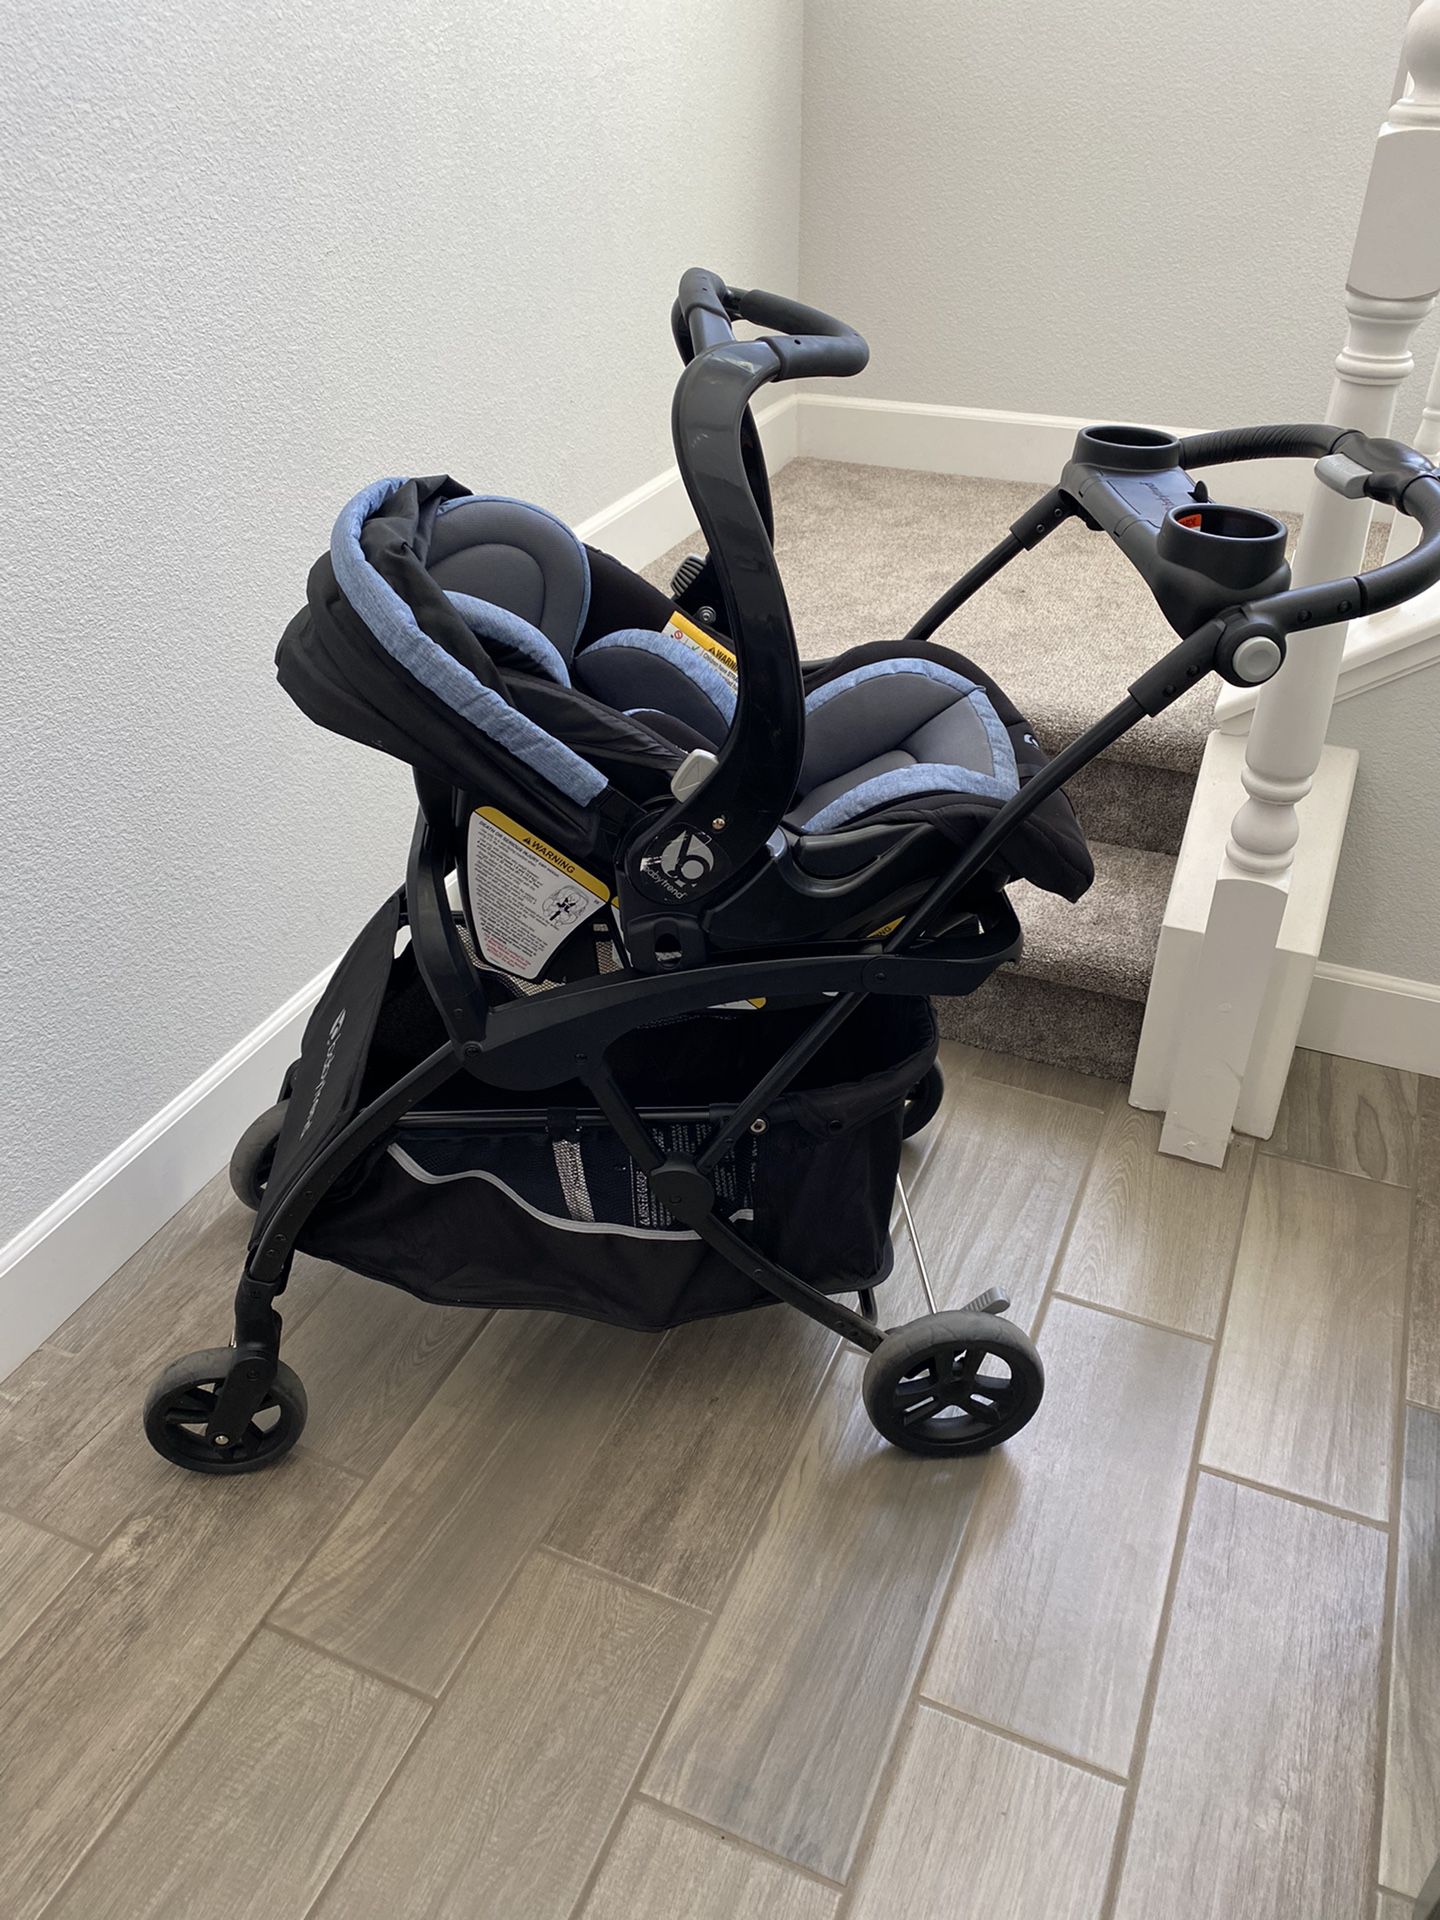 Baby Trend car seats and stroller adapter.